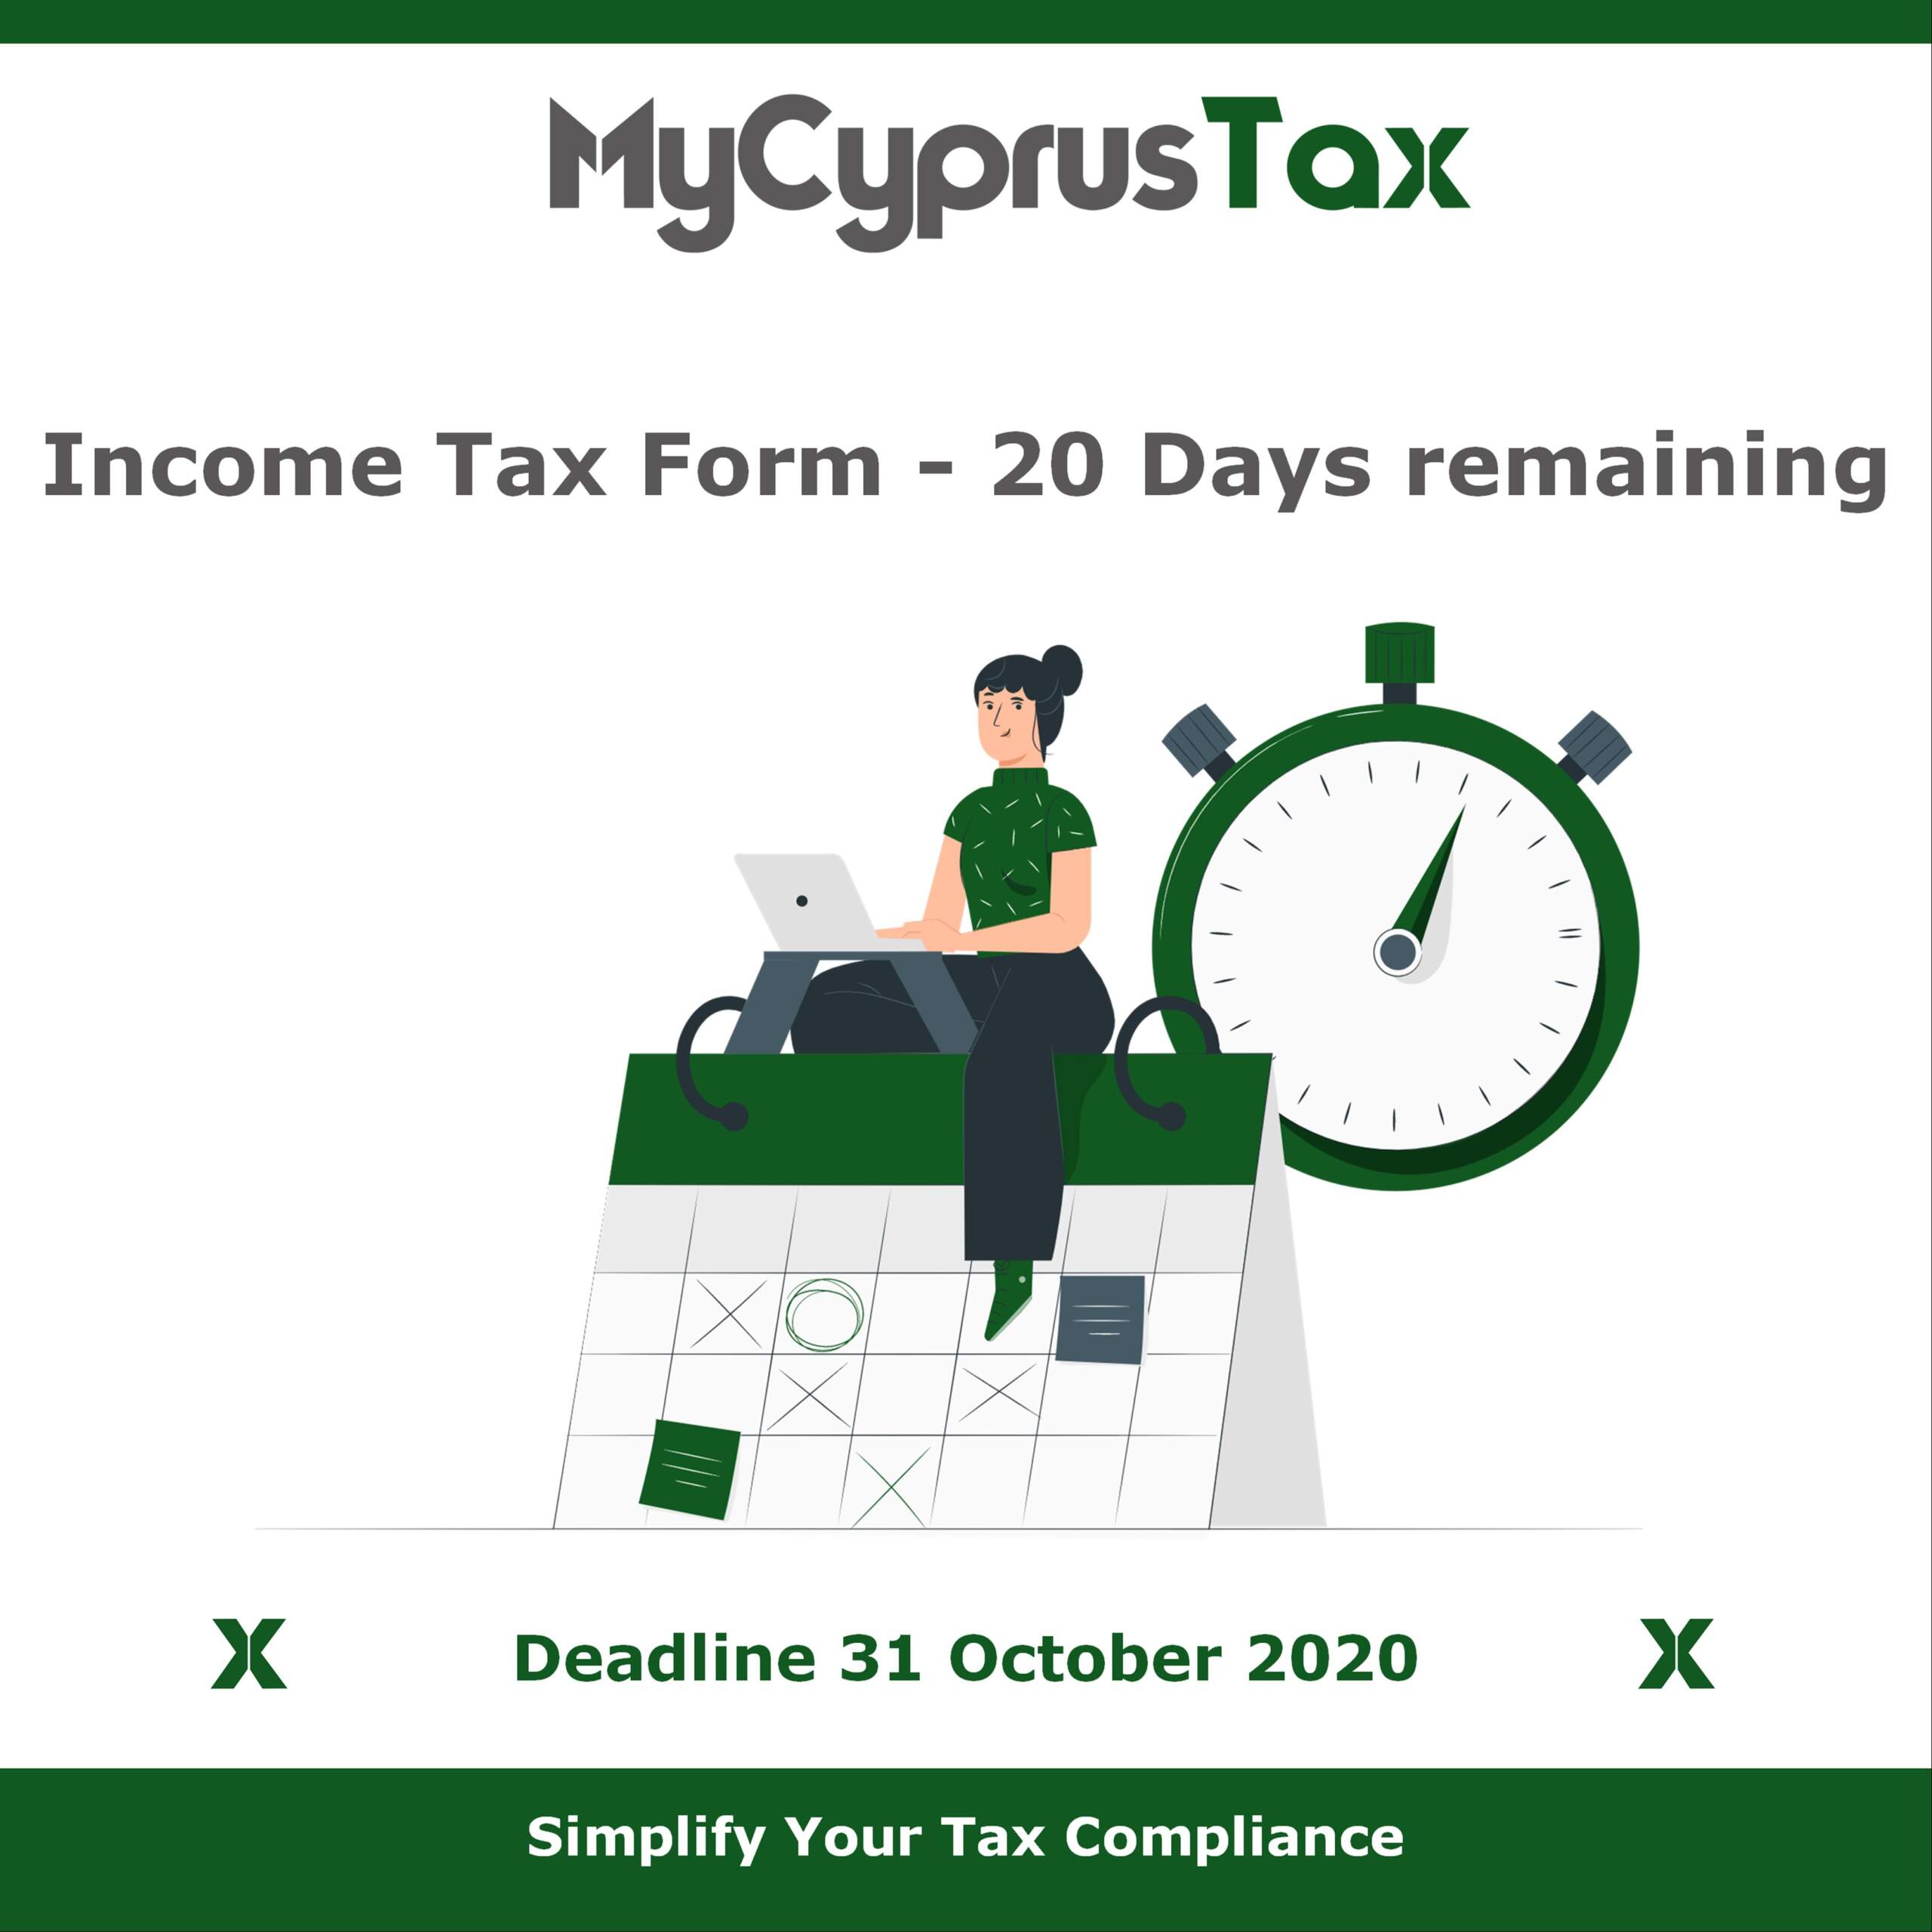 income-tax-20-days-remaining-mycyprustax